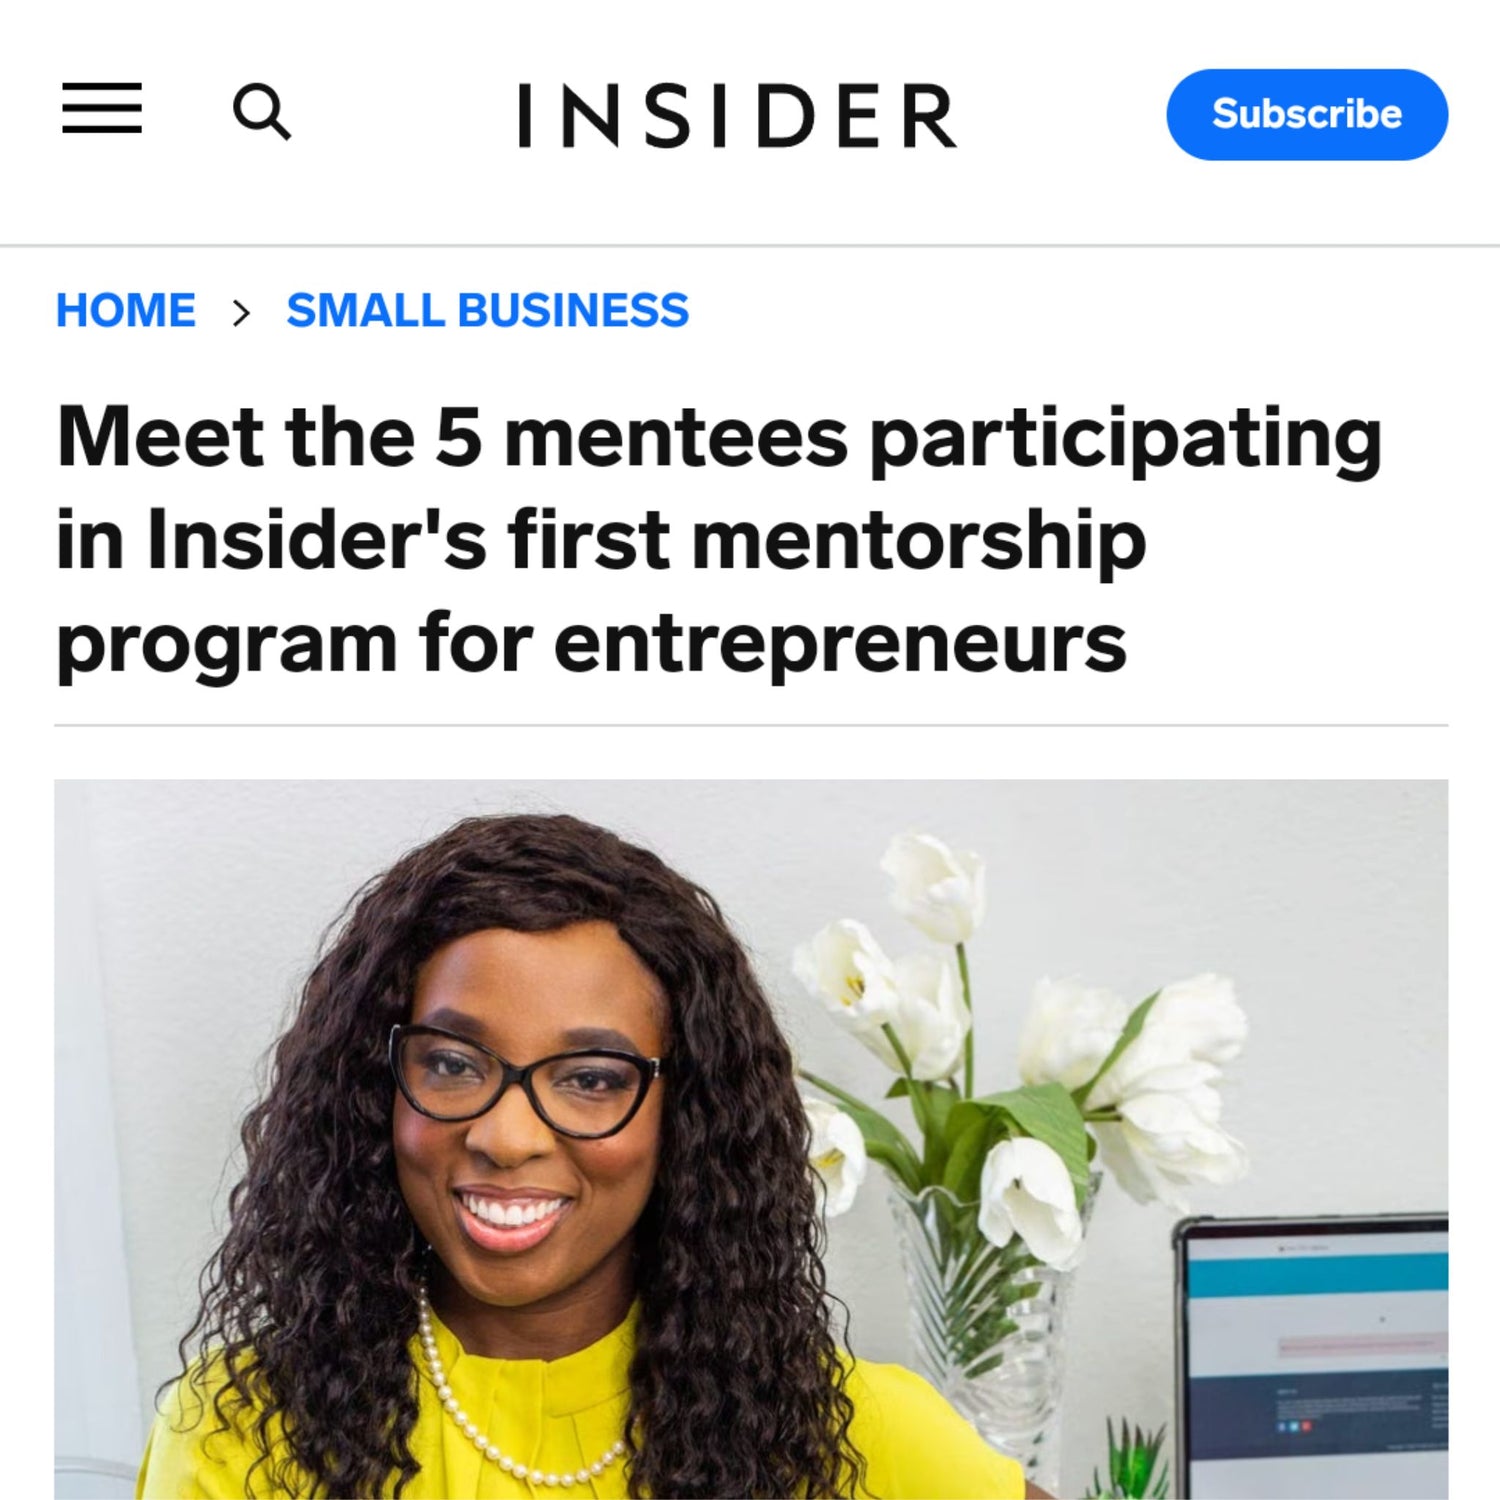 Insider article with headline stating "meet the 5 mentees participating in Indider's first mentorship program for entrepreneurs"